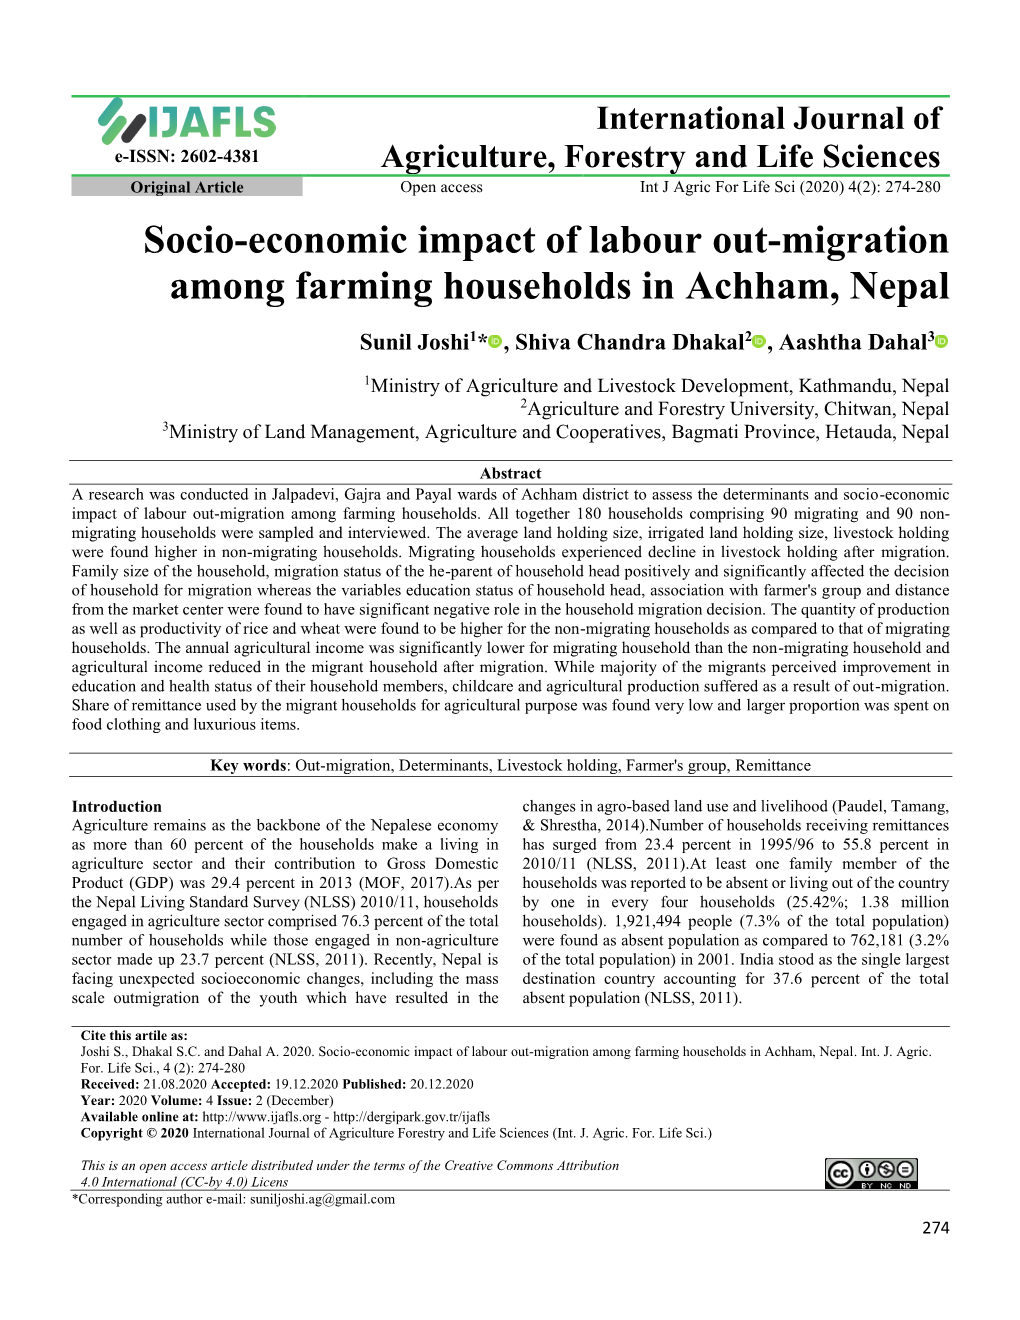 Socio-Economic Impact of Labour Out-Migration Among Farming Households in Achham, Nepal